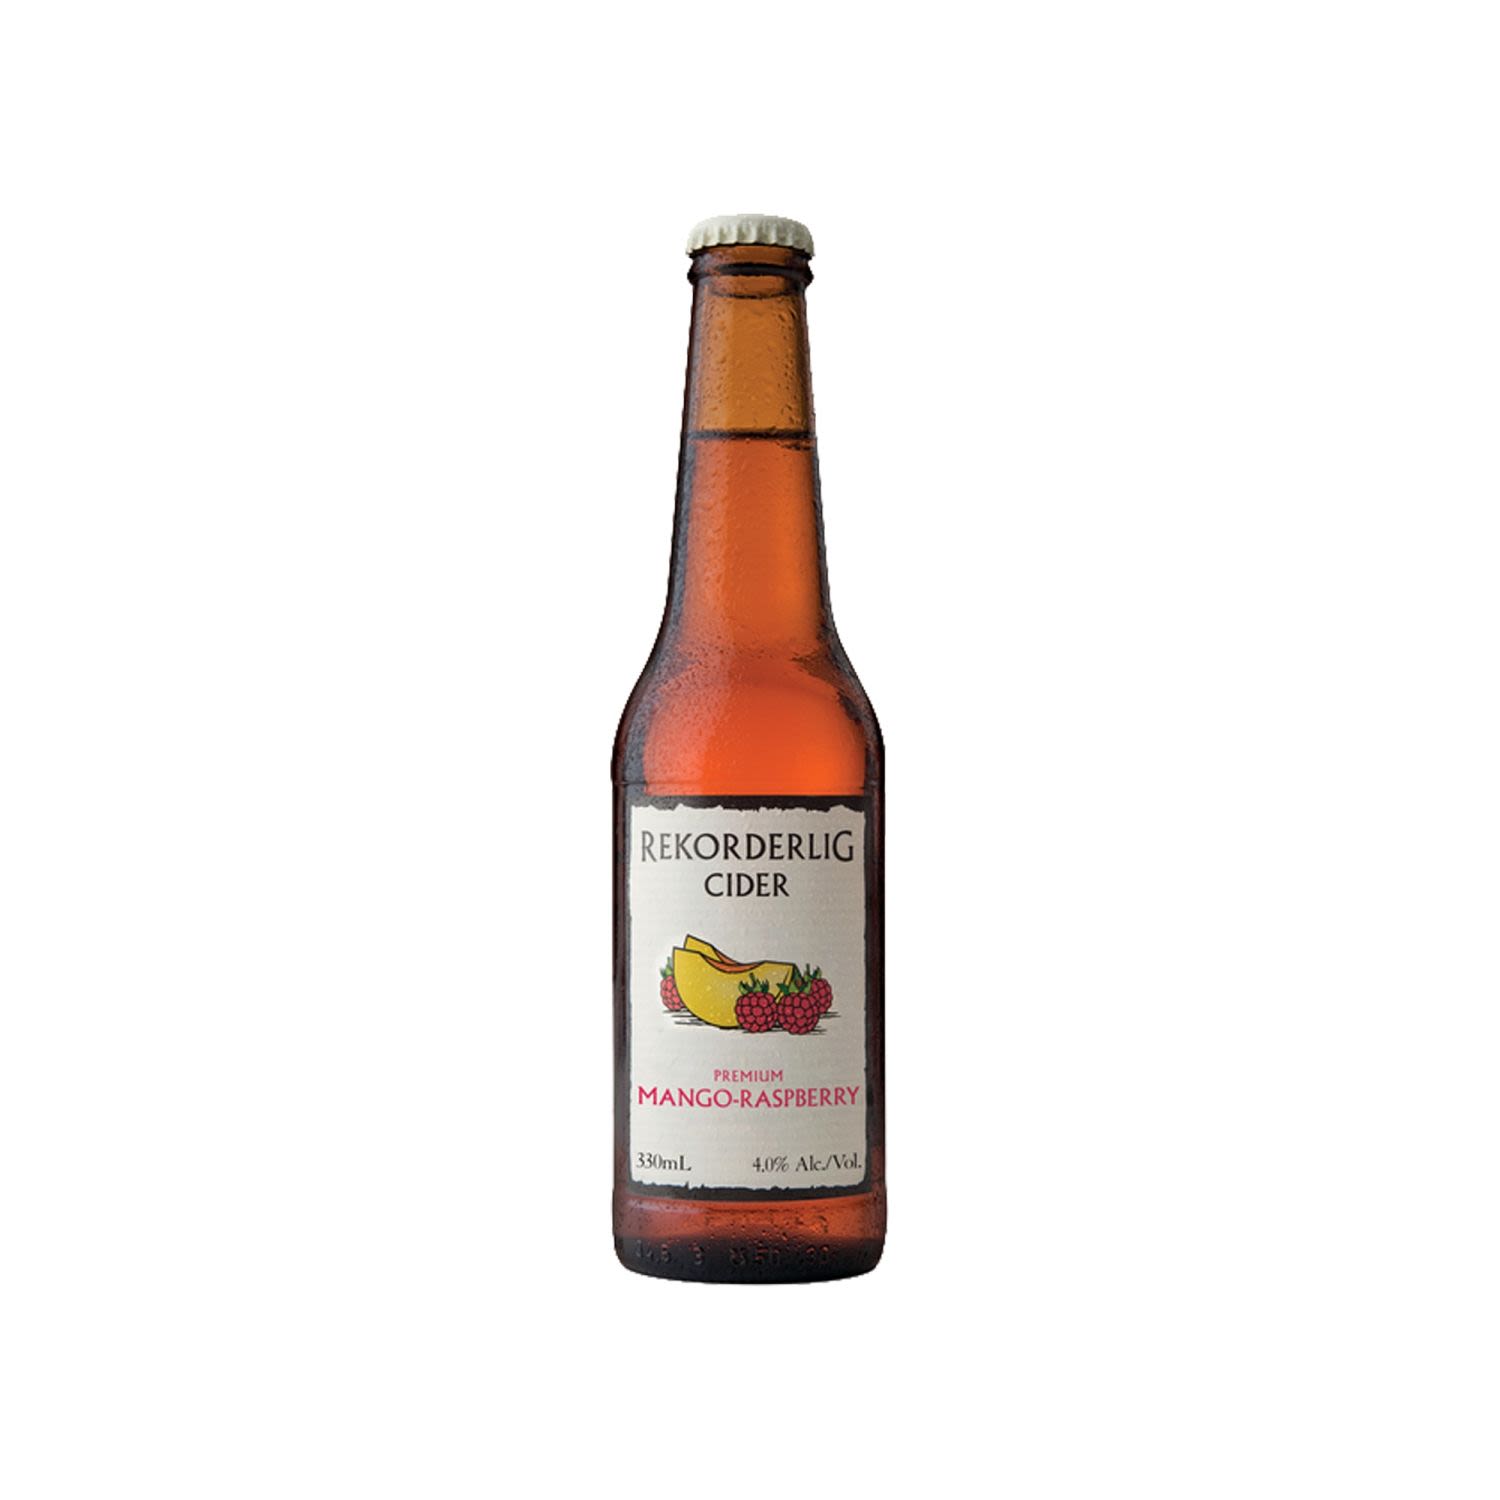 Rekorderlig Mango-Raspberry Cider is a sweet tropical cider with the intense fragrance and flavour of ripe mango with a hint of wild raspberries. It is best served cold over ice with a squeeze of lemon.<br /> <br />Alcohol Volume: 4.00%<br /><br />Pack Format: 4 Pack<br /><br />Standard Drinks: 1</br /><br />Pack Type: Bottle<br /><br />Country of Origin: Sweden<br />